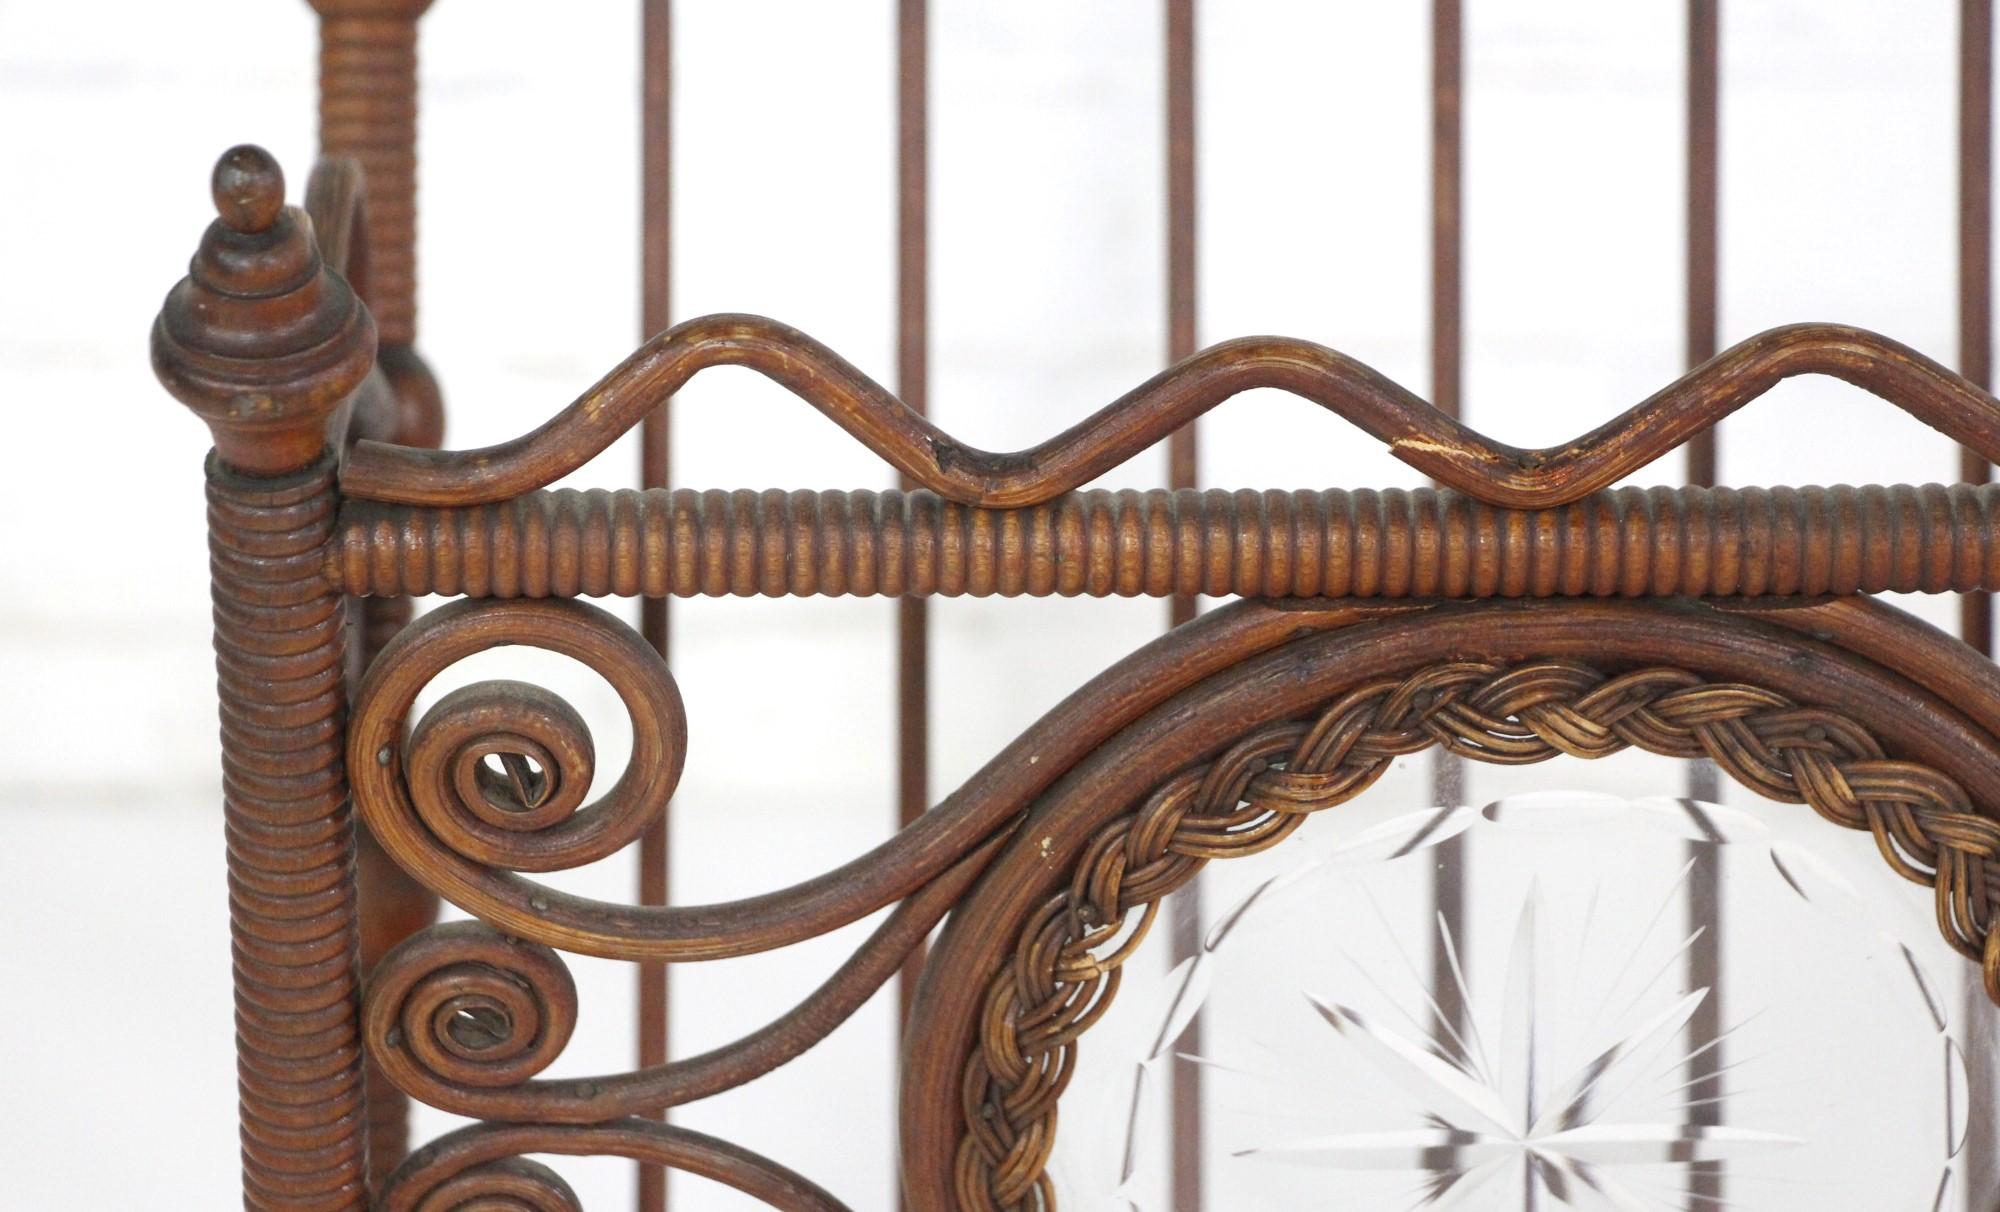 This rare antique Bentwood wicker magazine rack is very elaborate with a round etched glass motif in the center surrounded by a copper wheel. It dates to the early 1900's and is unusually ornate. This is missing two finials across the top. Please